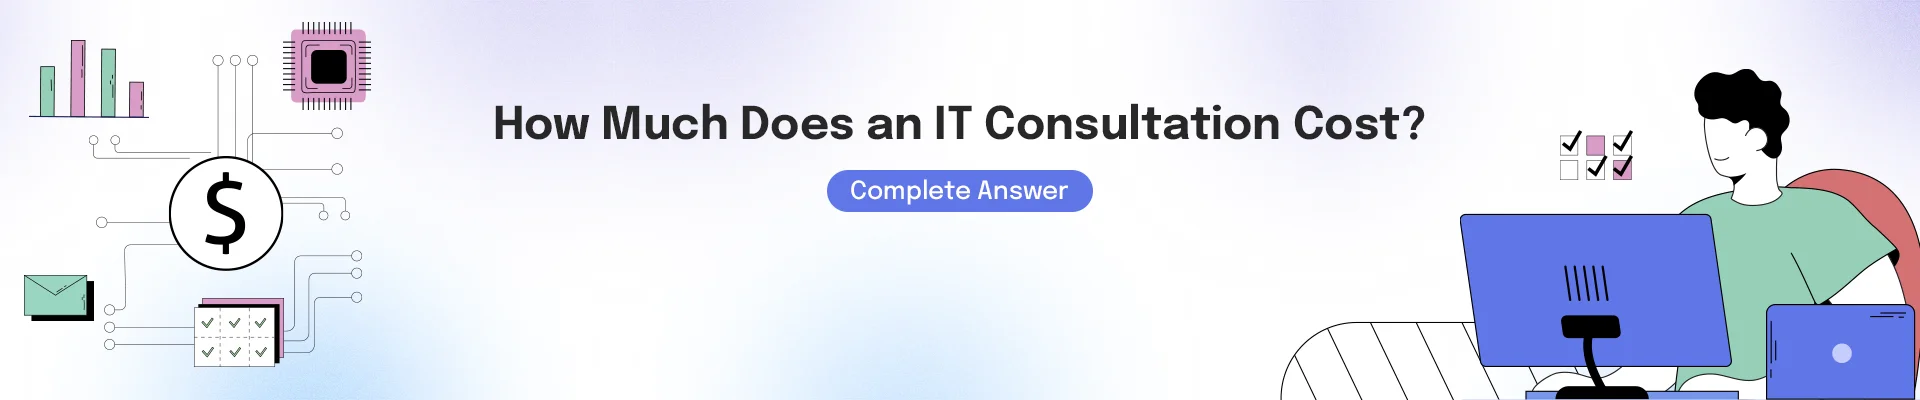 complete cost breakdown for IT consultation